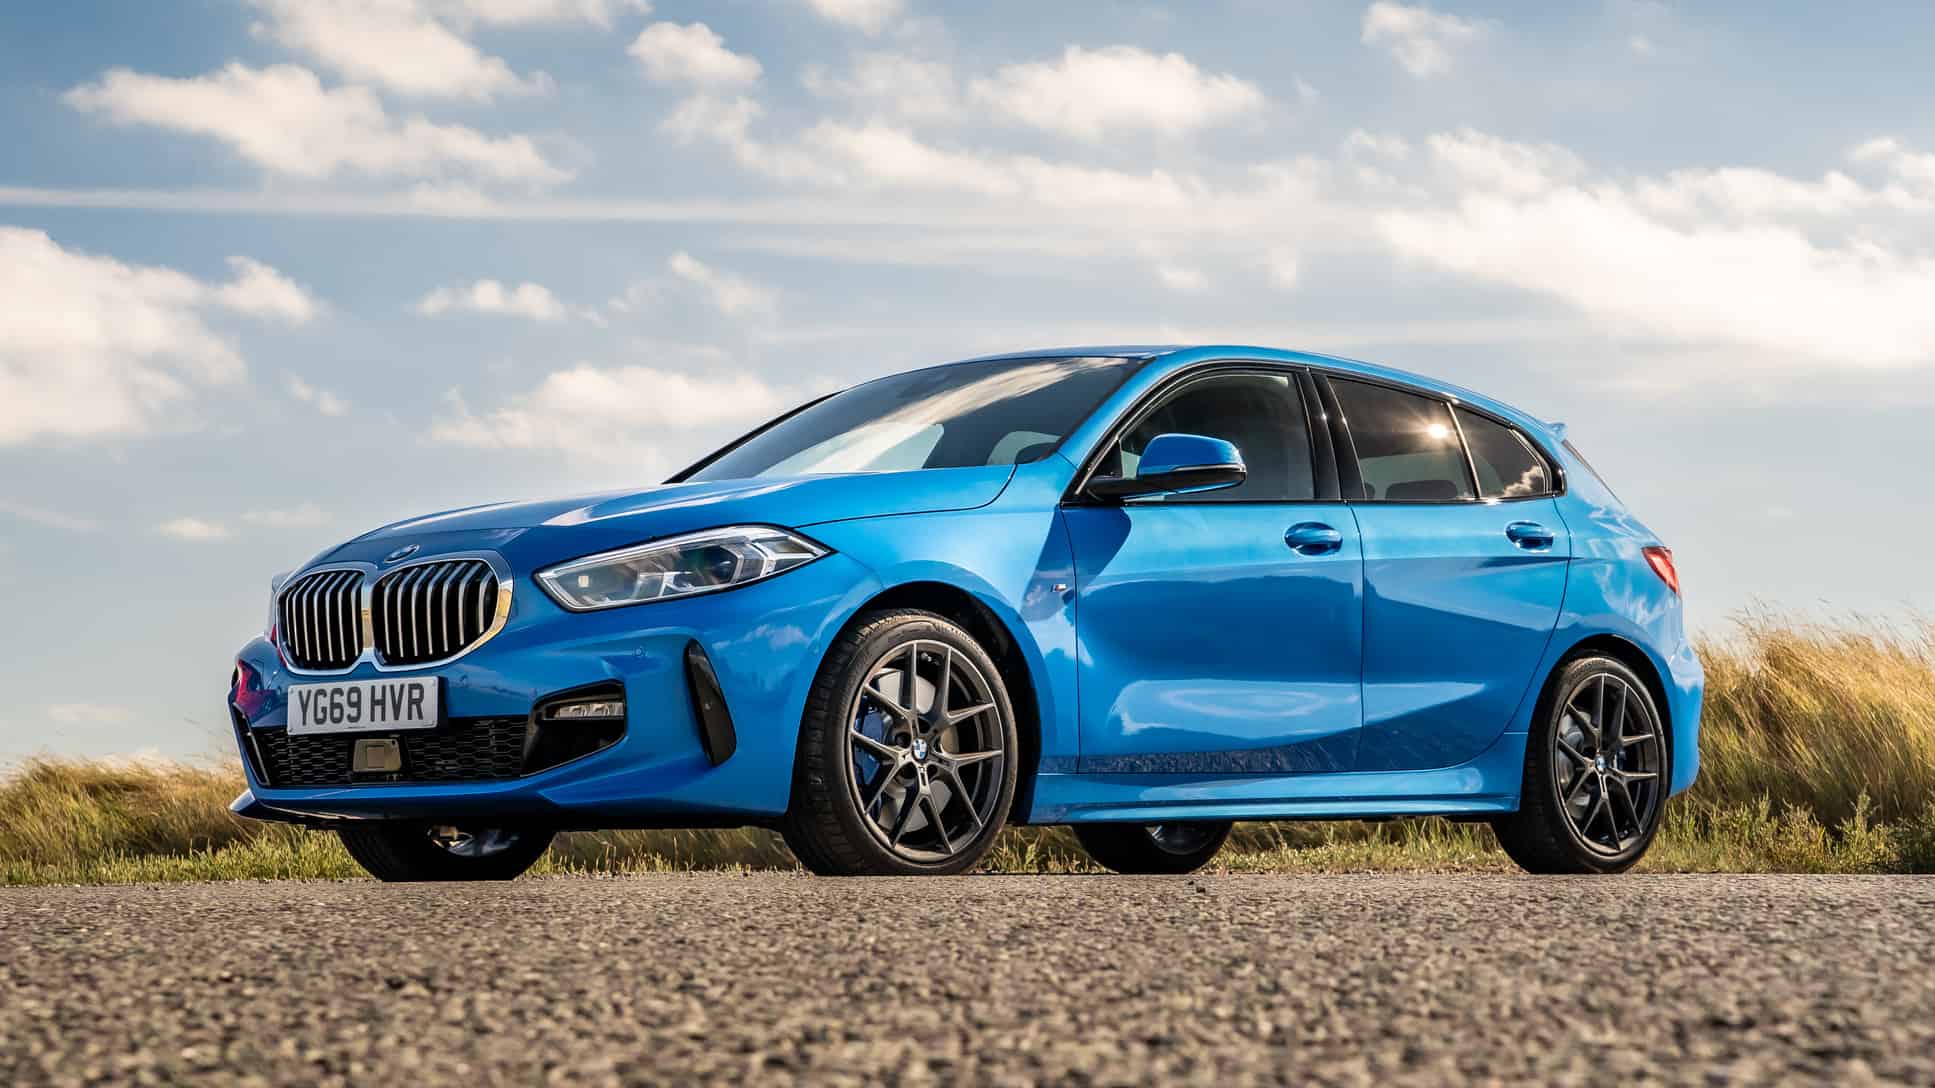 An overview of the BMW 1 series